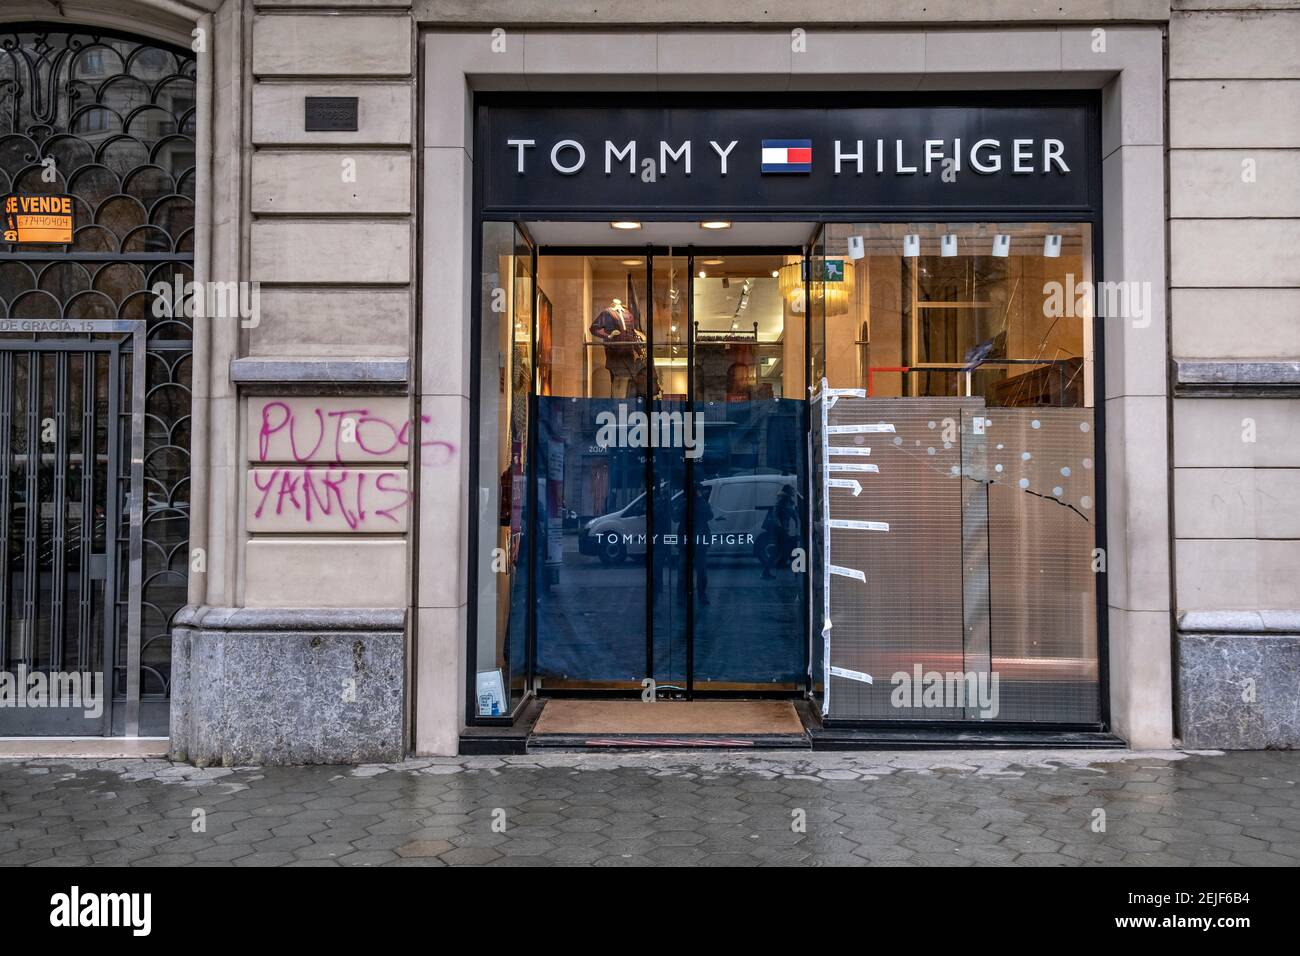 Barcelona, Spain. 22nd Feb, The Tommy Hilfiger store on Passeig de Gràcia is seen with anti-vandalism protections its windows.More than 50 stores have suffered damage to their shop windows and